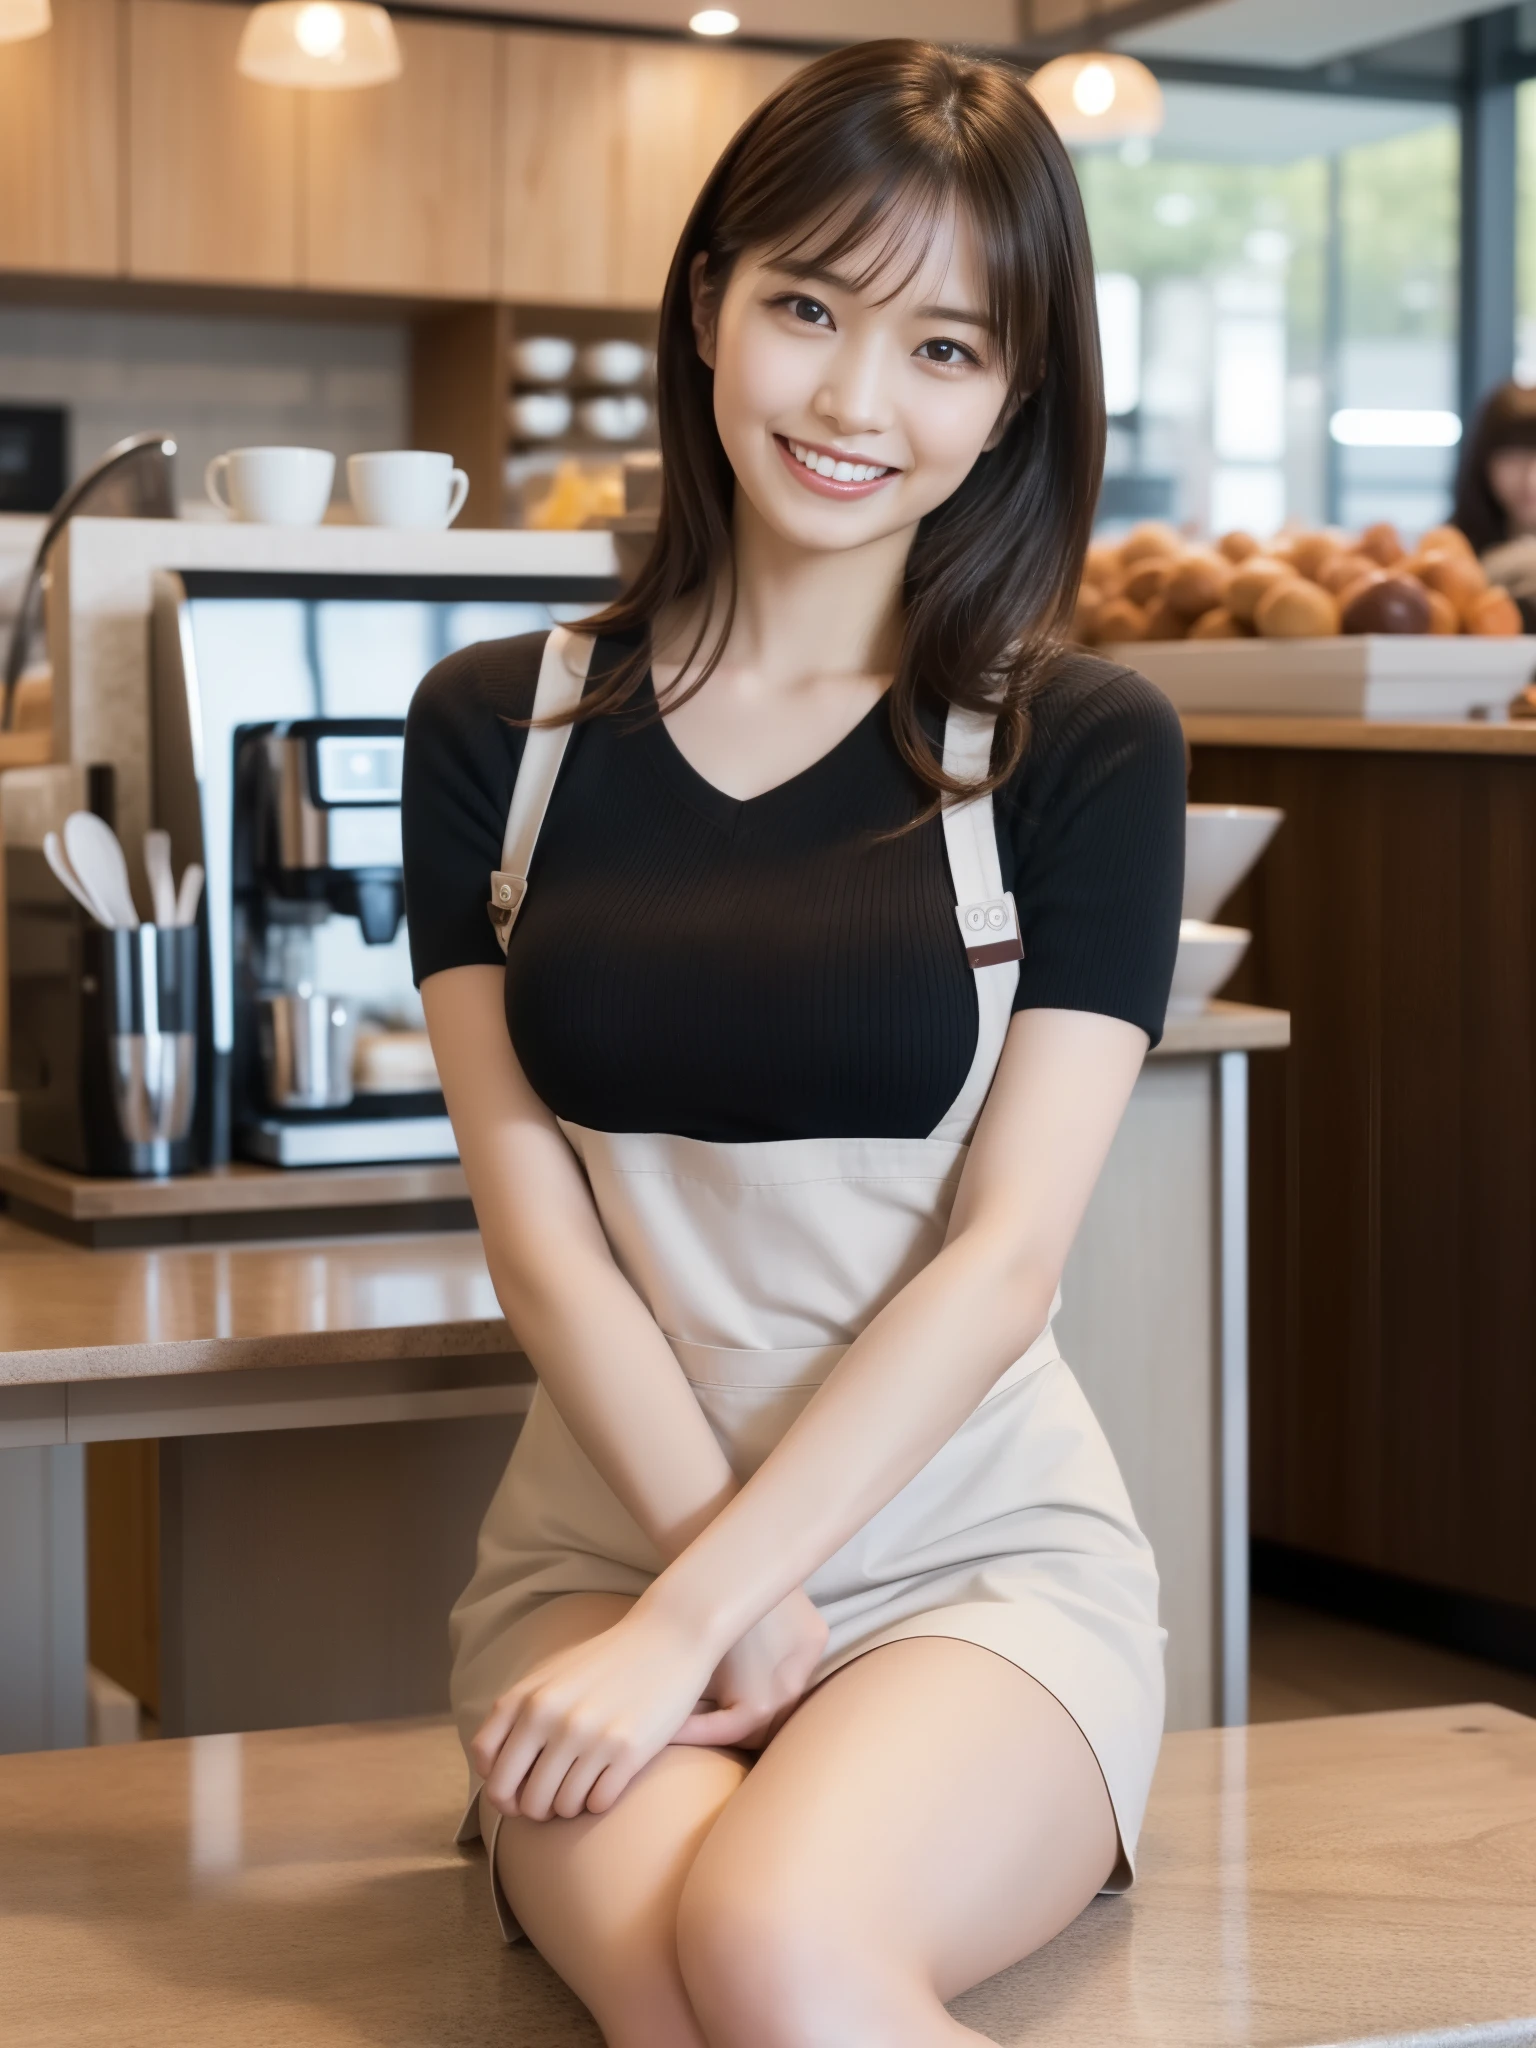 In 8K,highest quality:1.4, ultra high resolution:1.5, (realistic:1.4),masterpiece:1.2,(highest quality:1.4)、 Raw photo、 １japanese girl、 cute、medium breasts:1.5、 (alone:1.8)、kitchen、 (shy smile:1.3), smooth skin、30 years old:1.5、beautiful black eyes、natural skin texture:1.3, Realistic eye and face details:1.8、 (brown medium hair,bangs), (touch hair:1.4)、Nogizaka、cute colorful apron、cafe clerk、supple fingertips、beautiful black eyes、natural skin texture:1.3, Realistic eye and face details:1.7、look at the audience、full body shot:1.8、beautiful feet、gravure、attractive girl、thighs、Are standing、coffee